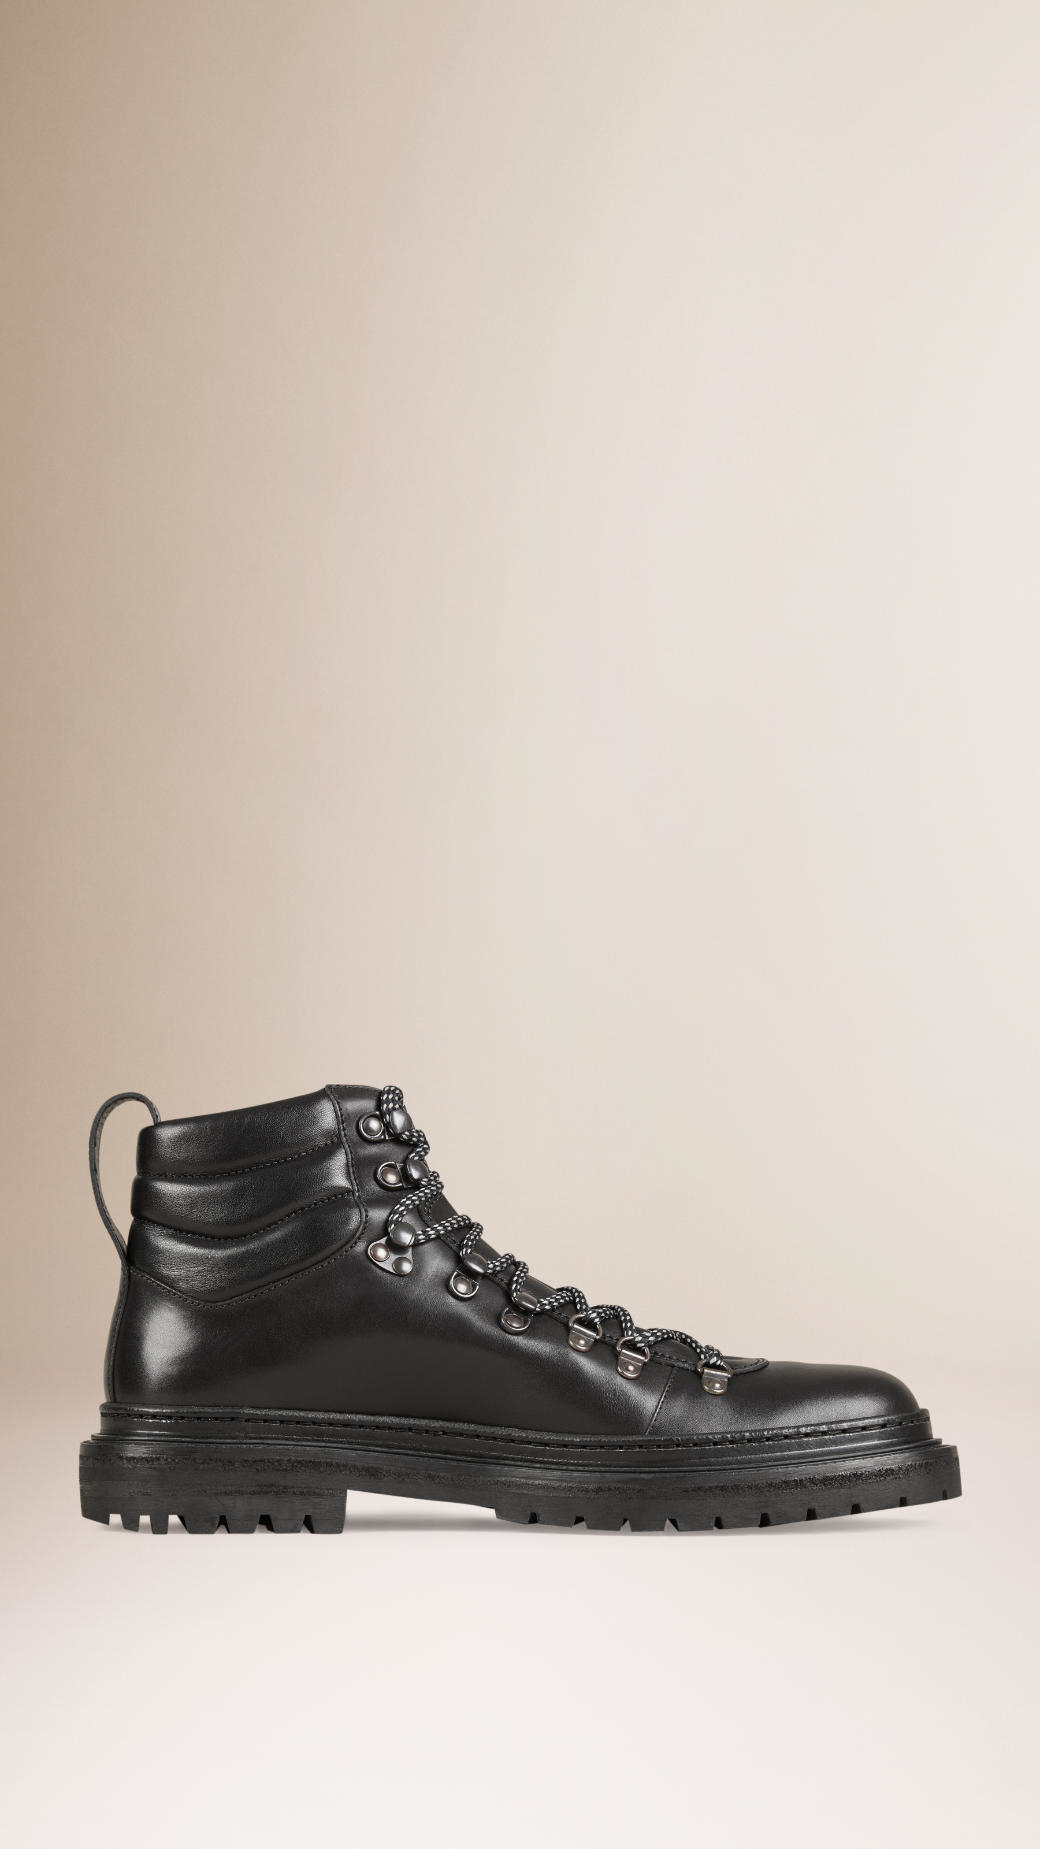 Burberry Leather Hiking Boots Black for Men - Lyst